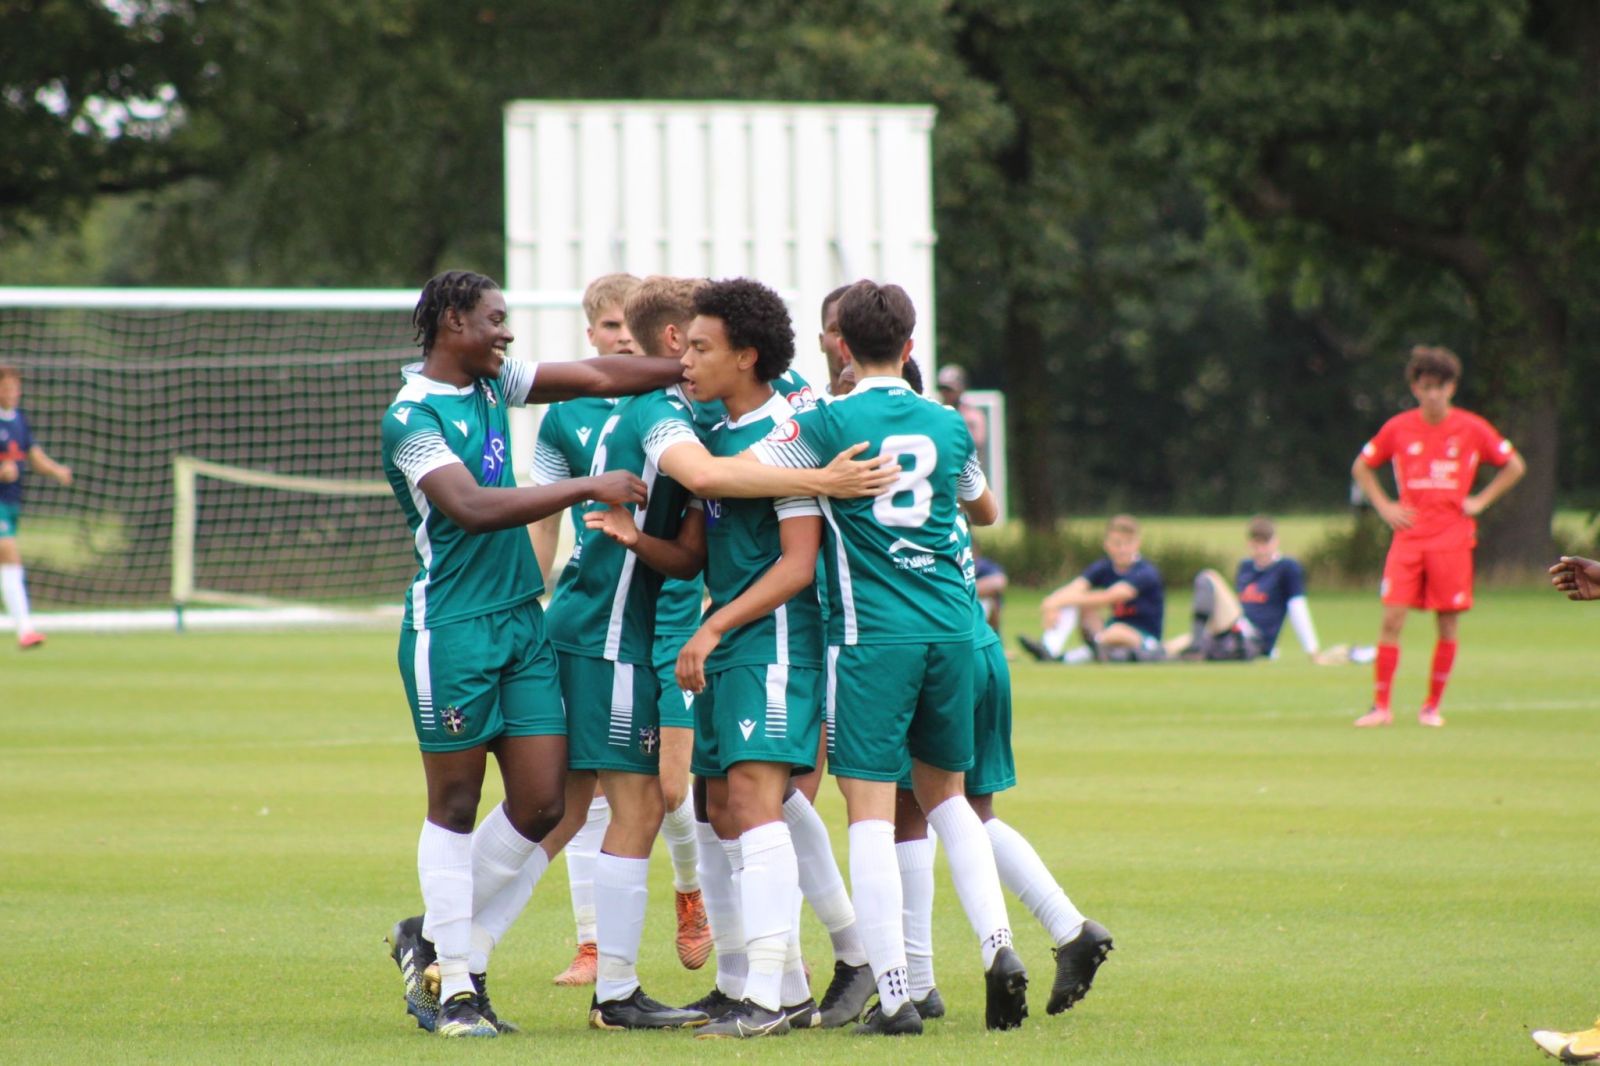 Football players in green shirts congratulating one of their players